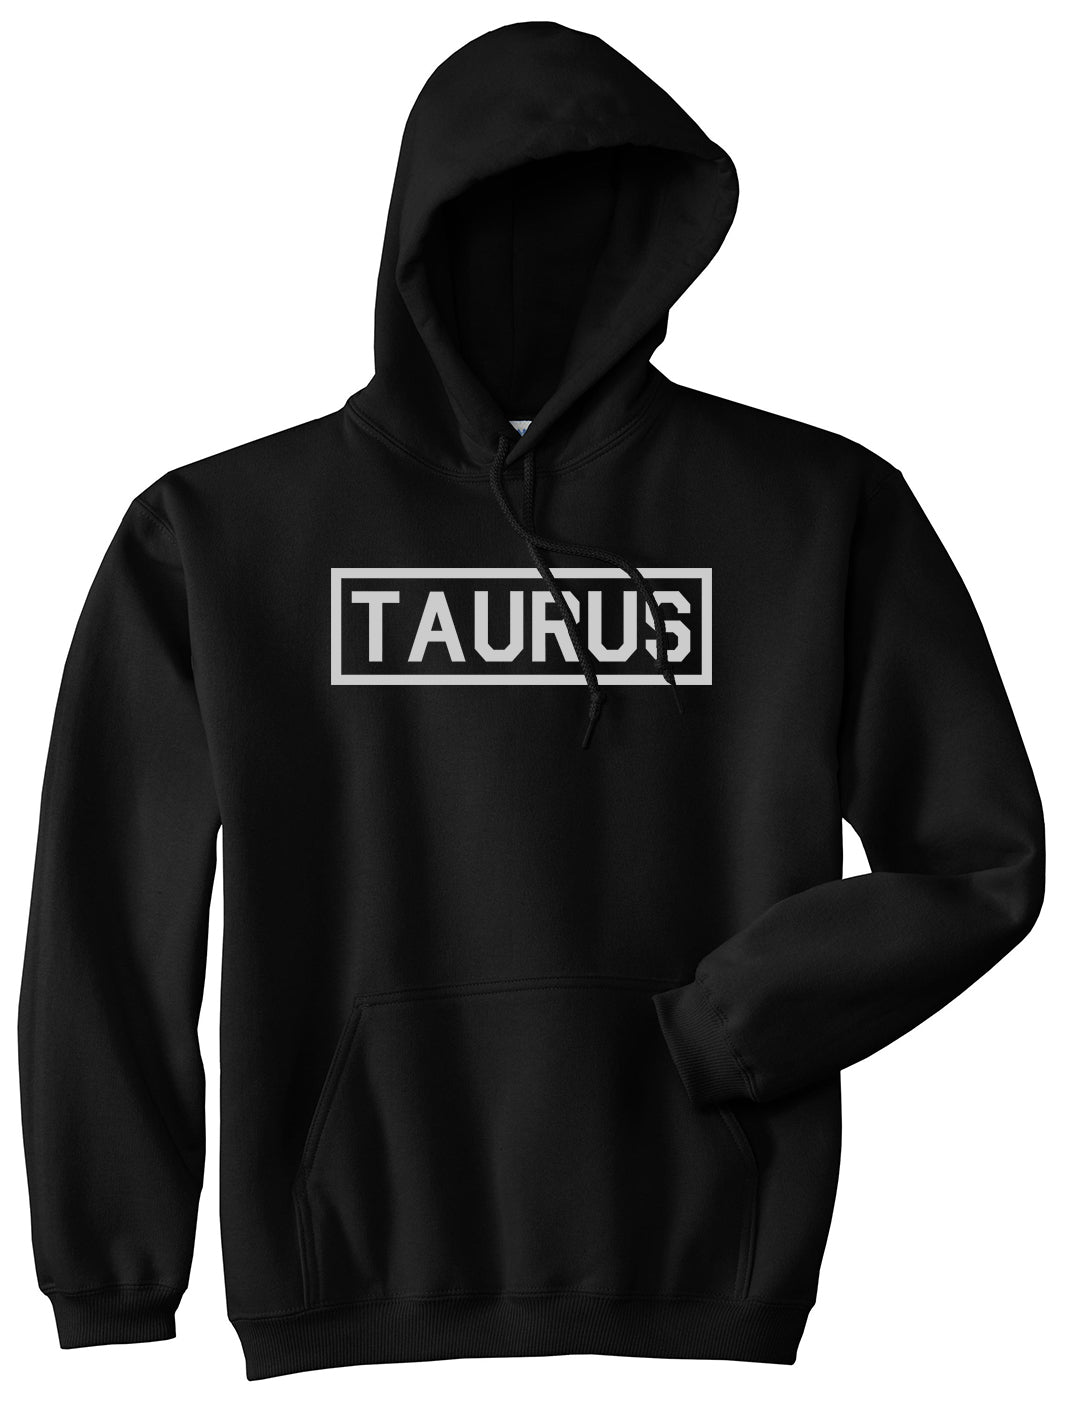 Taurus Horoscope Sign Mens Black Pullover Hoodie by KINGS OF NY